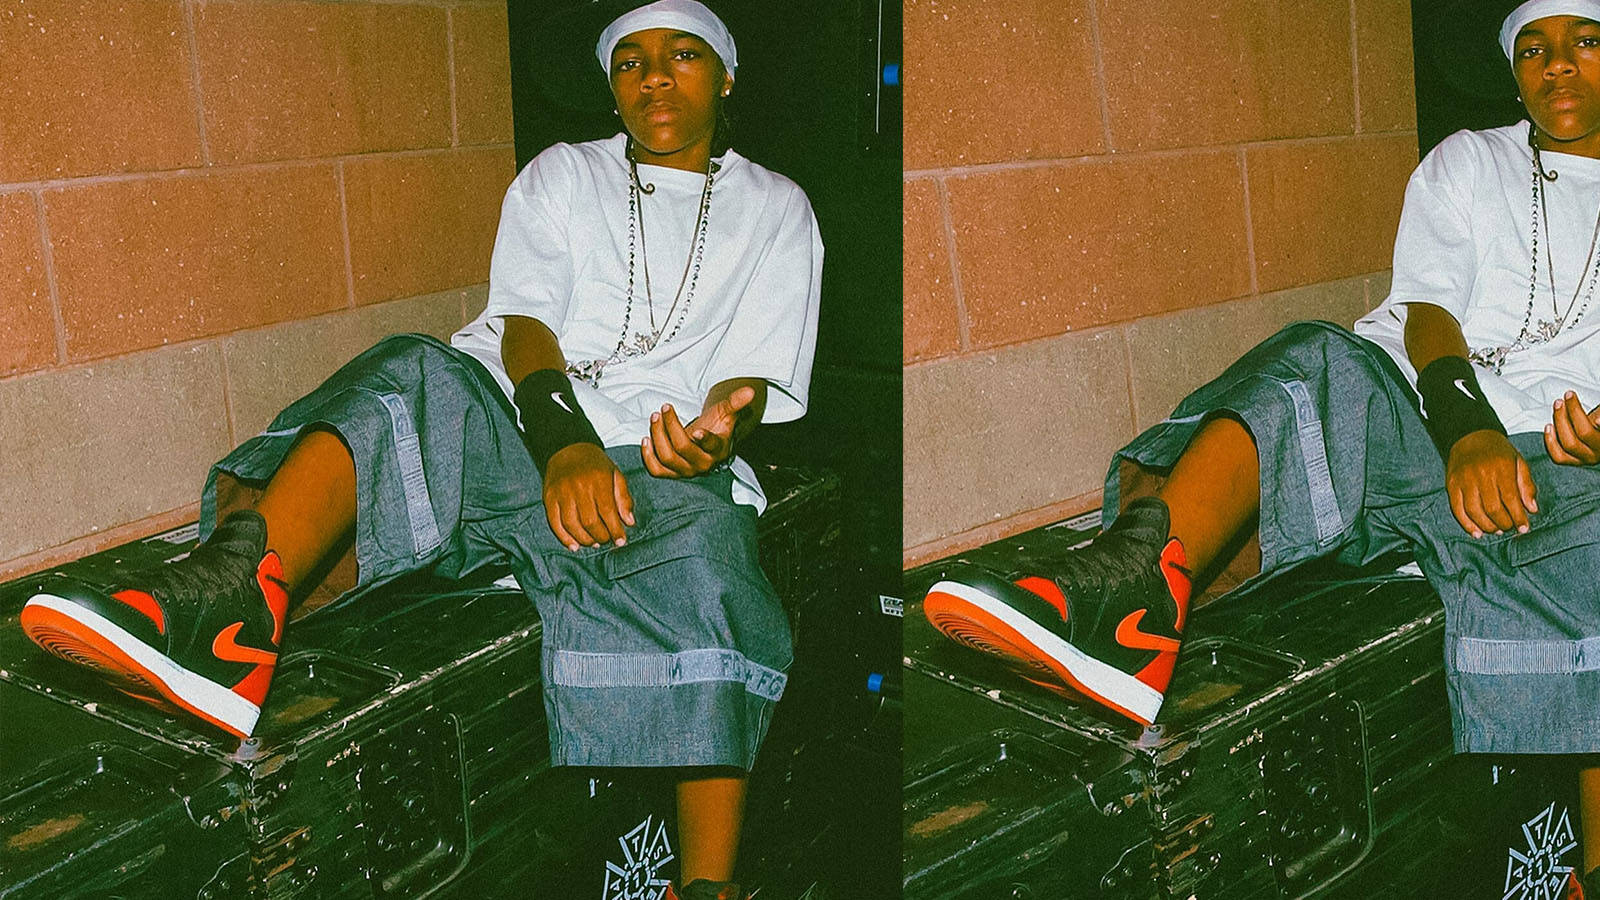 The Best Of 90s Hip Hop Fashion Trends That Defined The Decade The